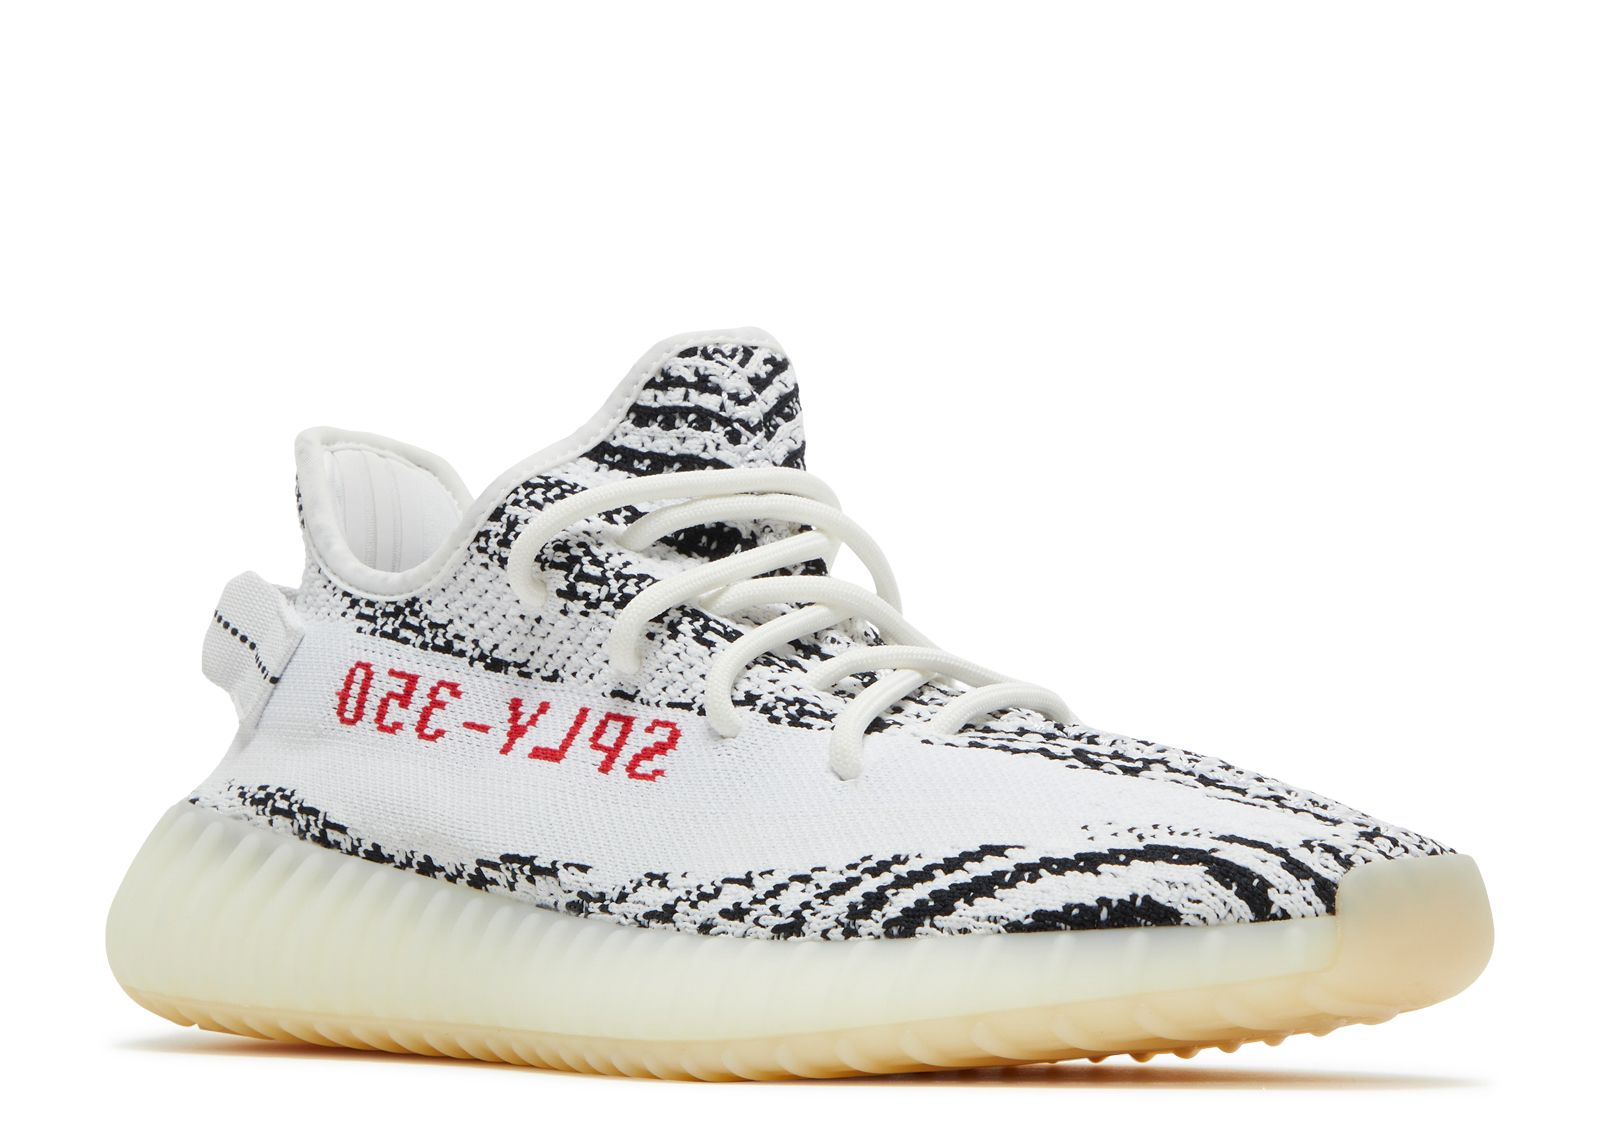 Authentic Yeezy 350 Boost V2 “Blade on sale,for kicksontrade